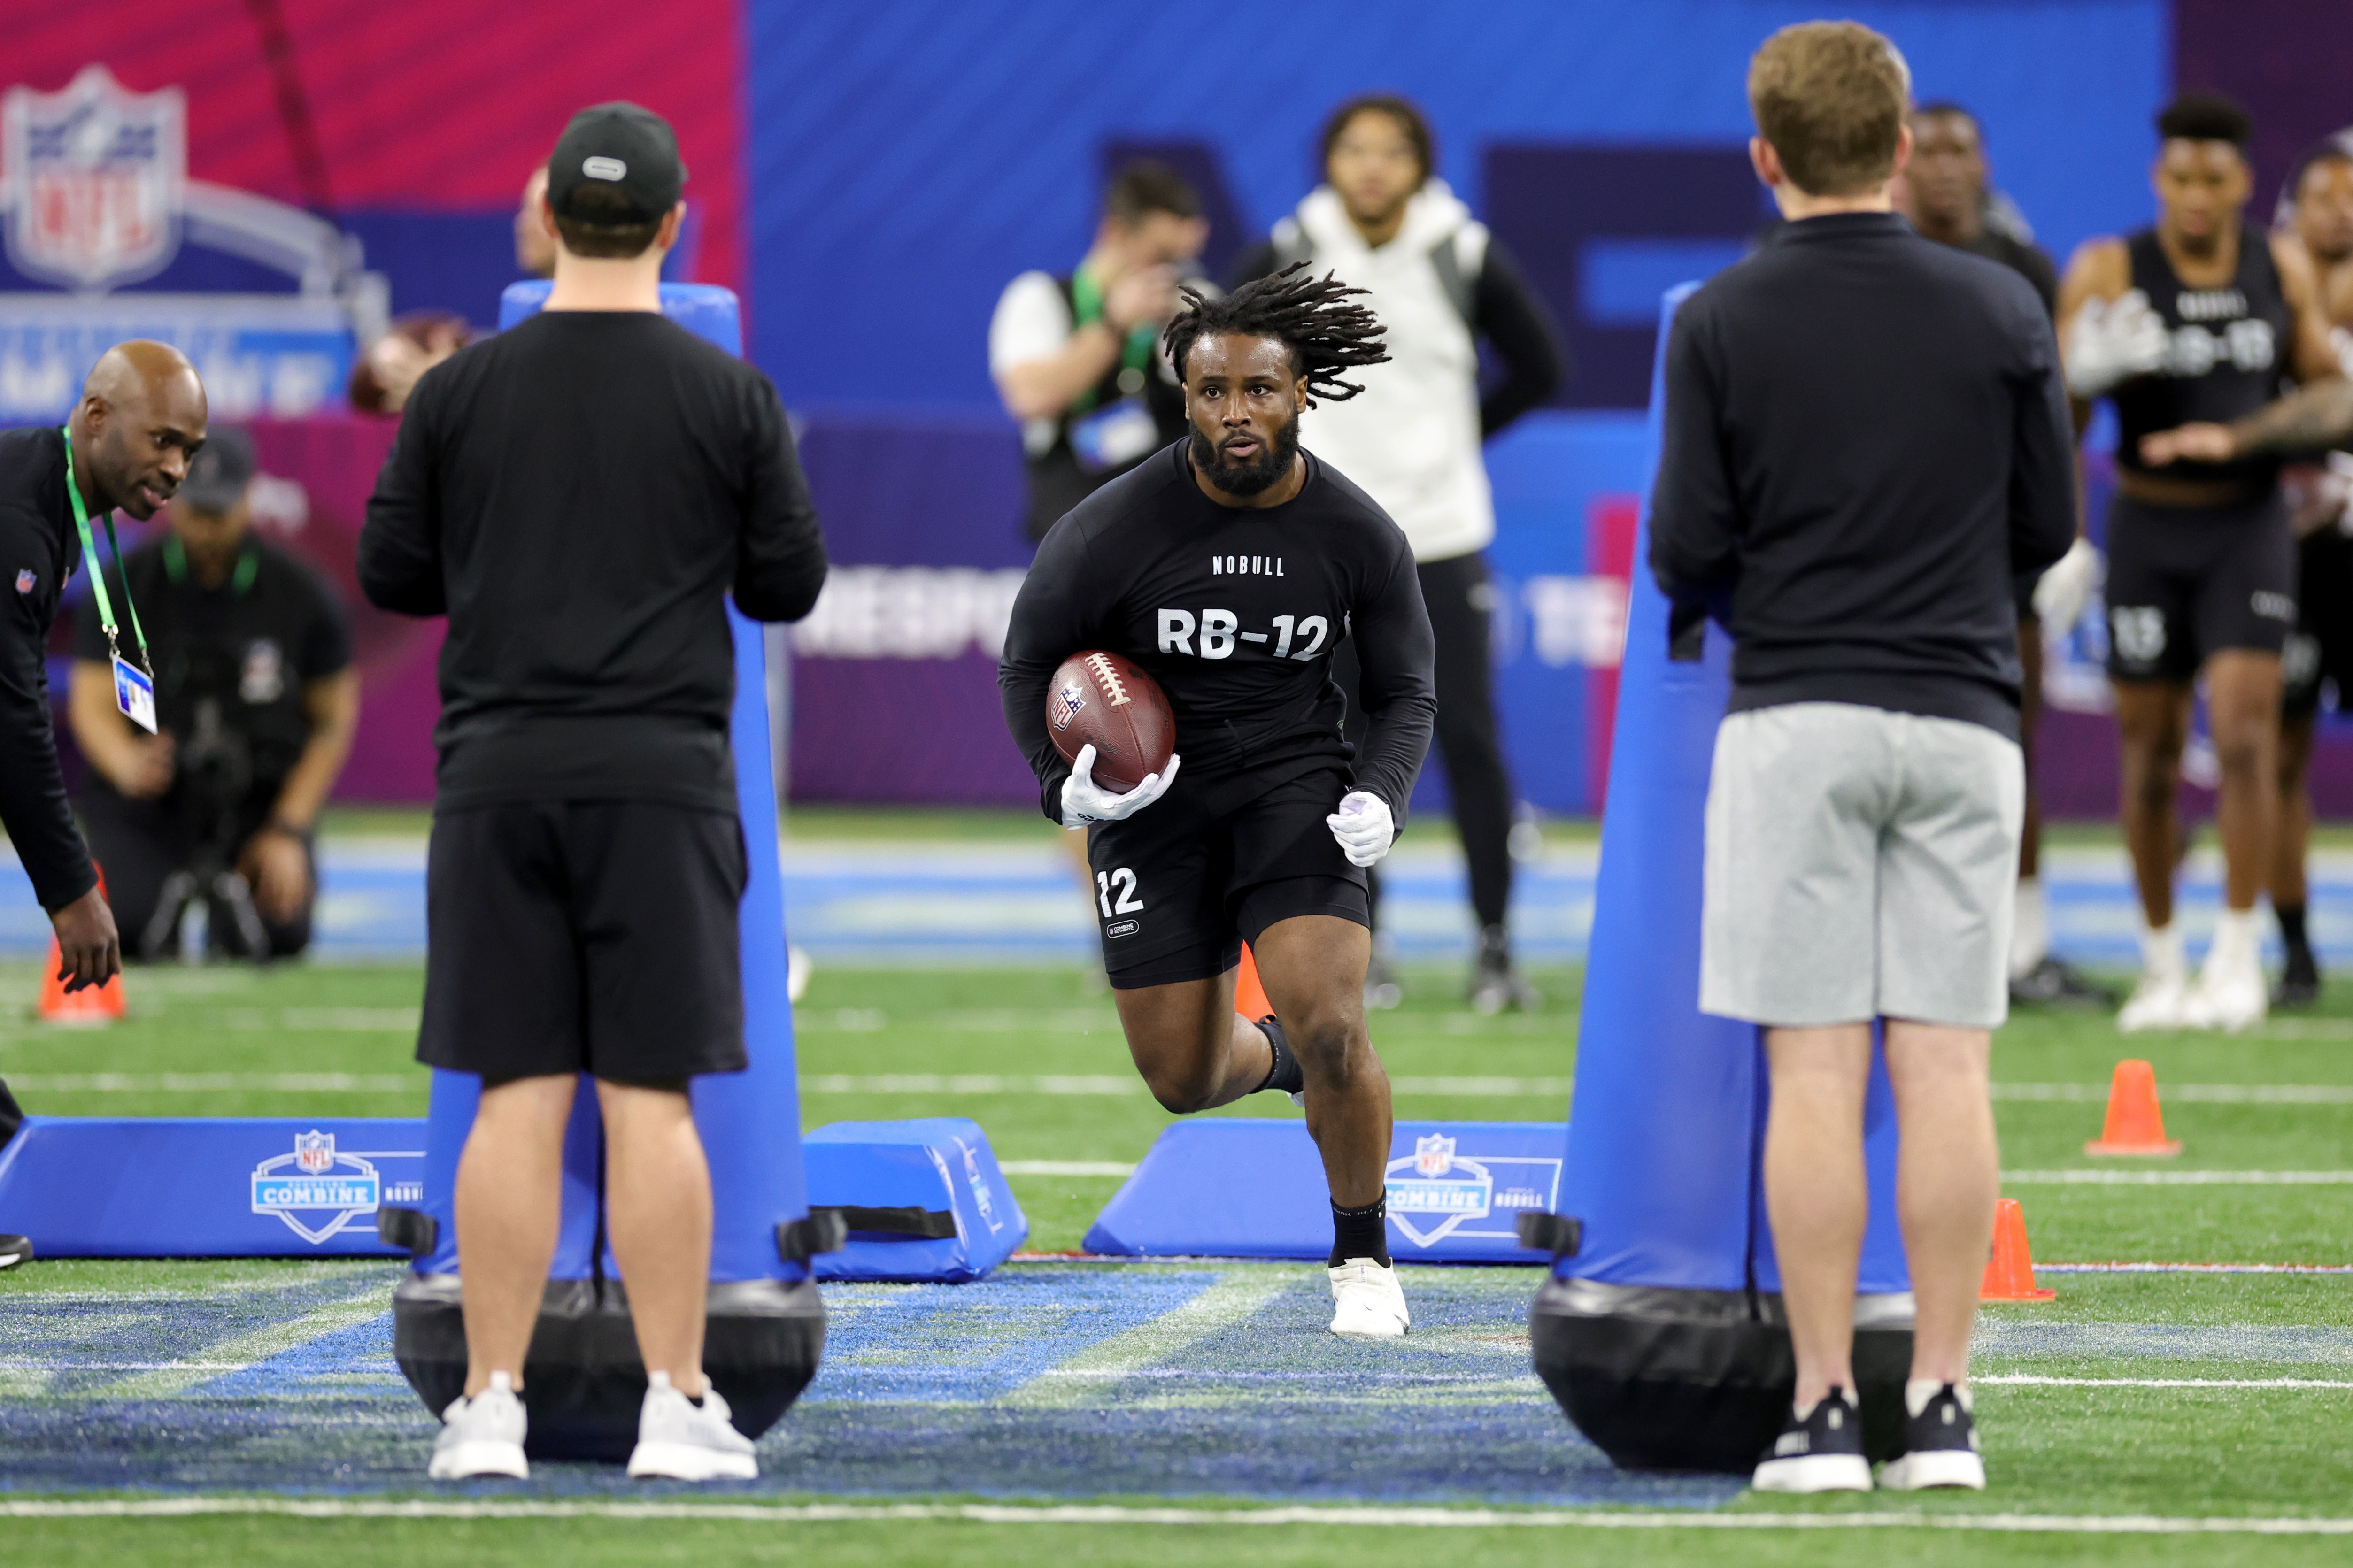 Mohamed Ibrahim of Minnesota participates in a drill during the NFL Combine at Lucas Oil Stadium on March 05, 2023 in Indianapolis, Indiana.